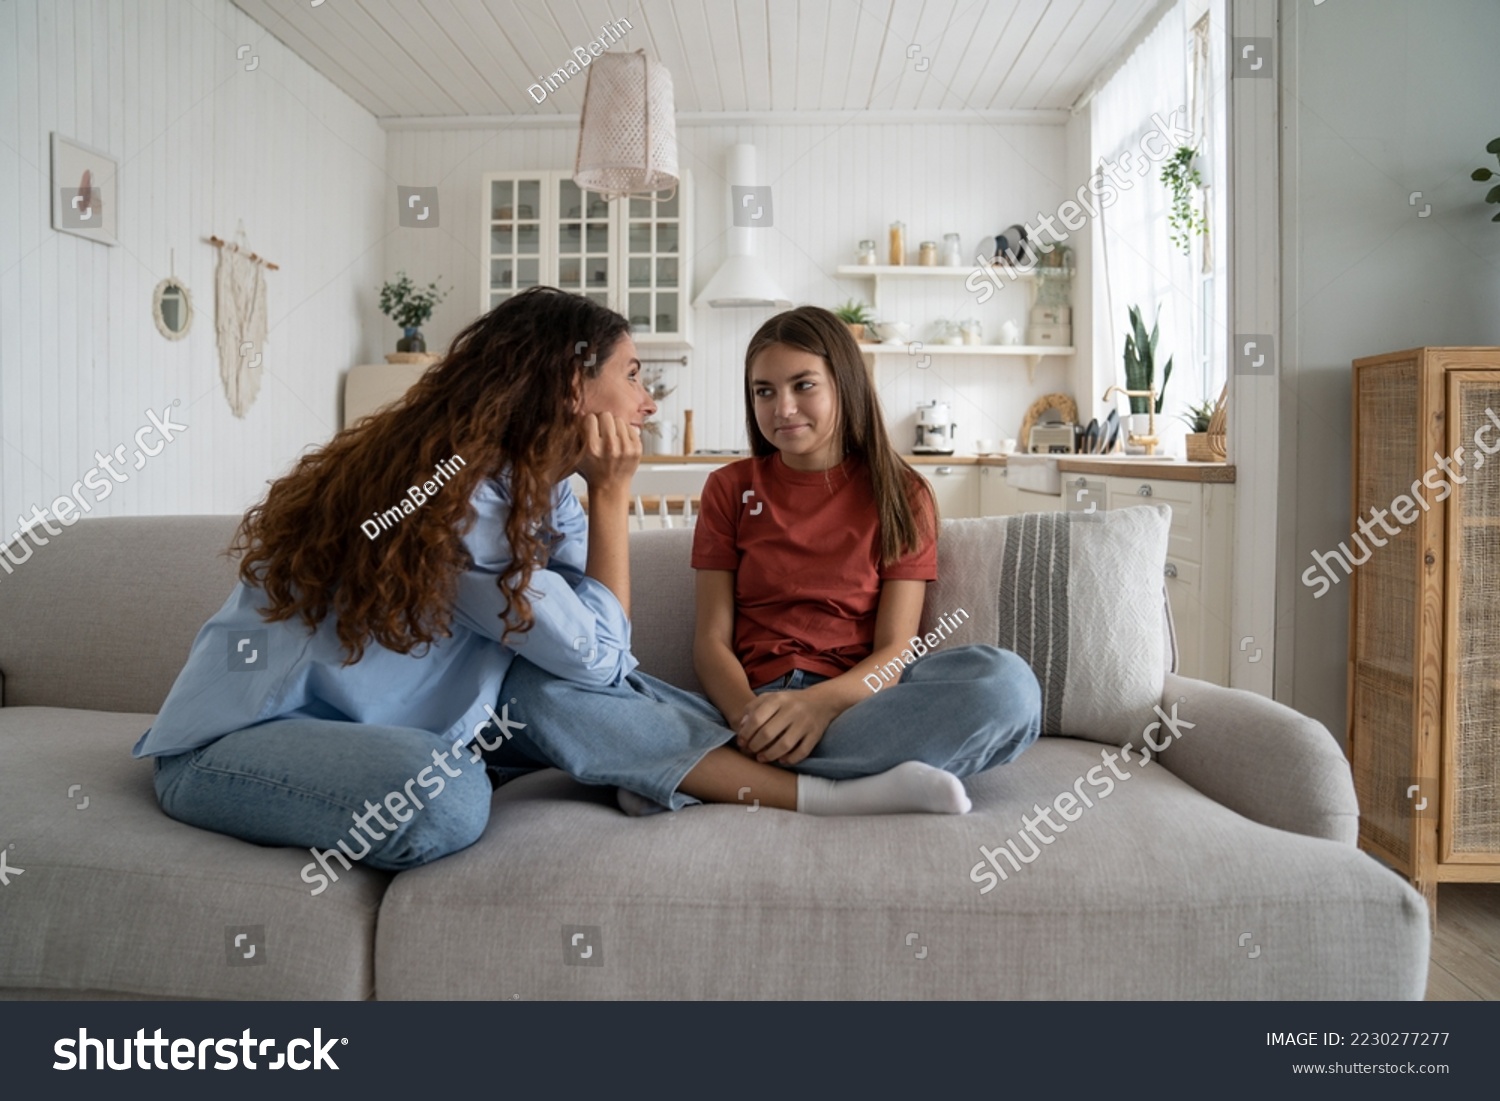 Teenage daughter sharing secrets with young loving supportive mother, parent mom talking chatting with adolescent girl while sitting together on sofa at home. Healthy parent-teen relationships #2230277277